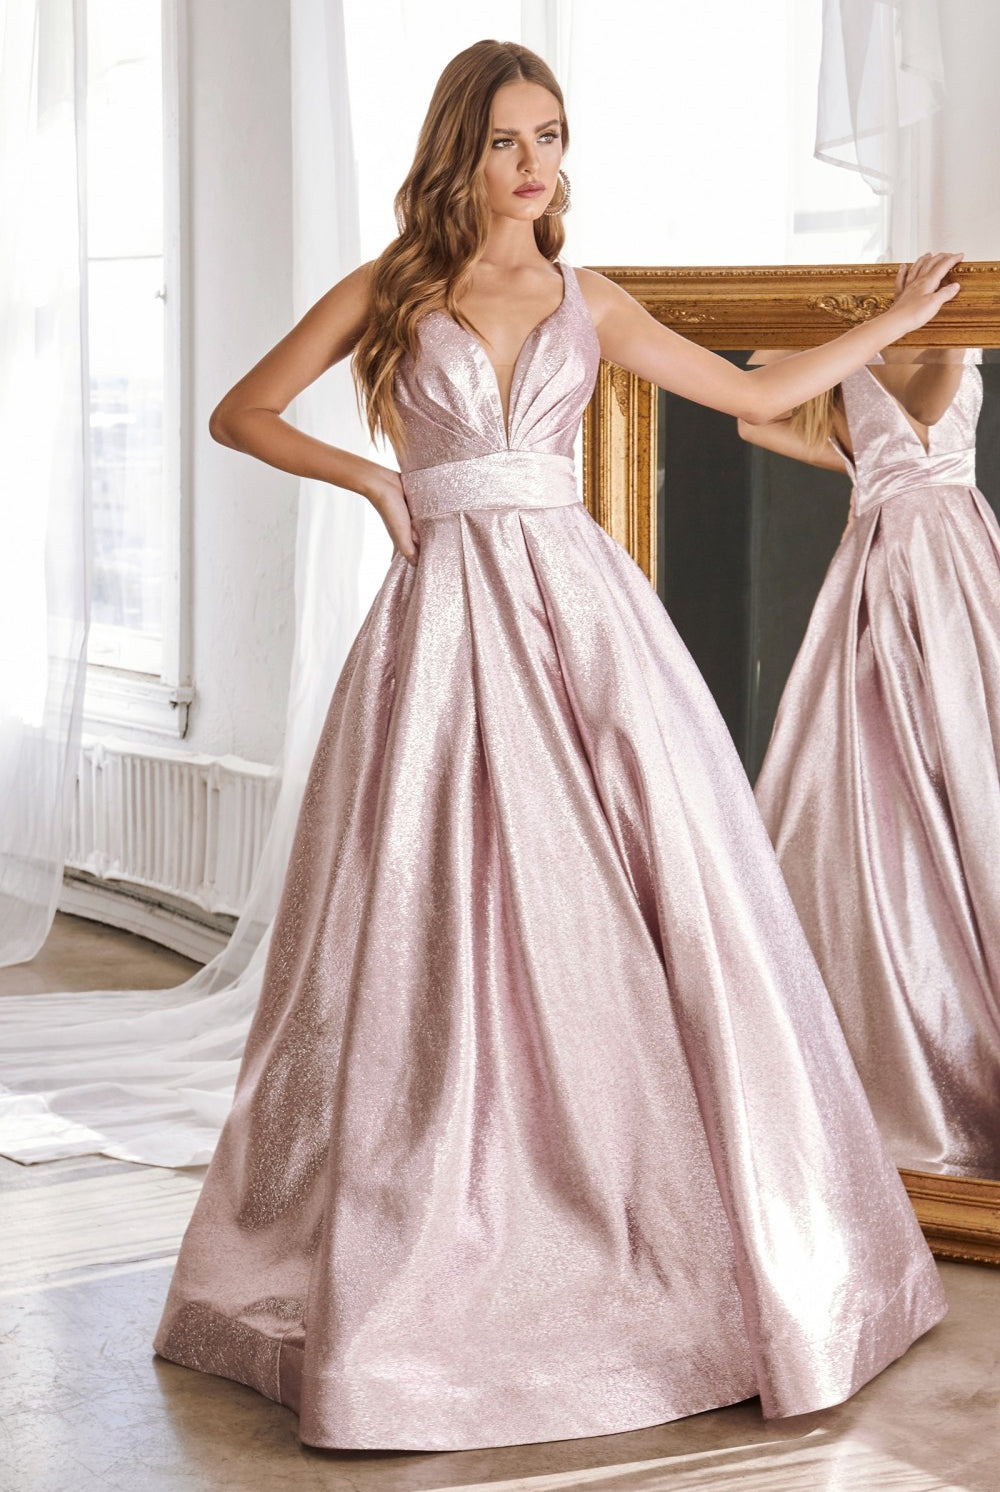 Metallic Prom Pleated Bustline with Glittery Princess Skirt and Pockets-smcdress